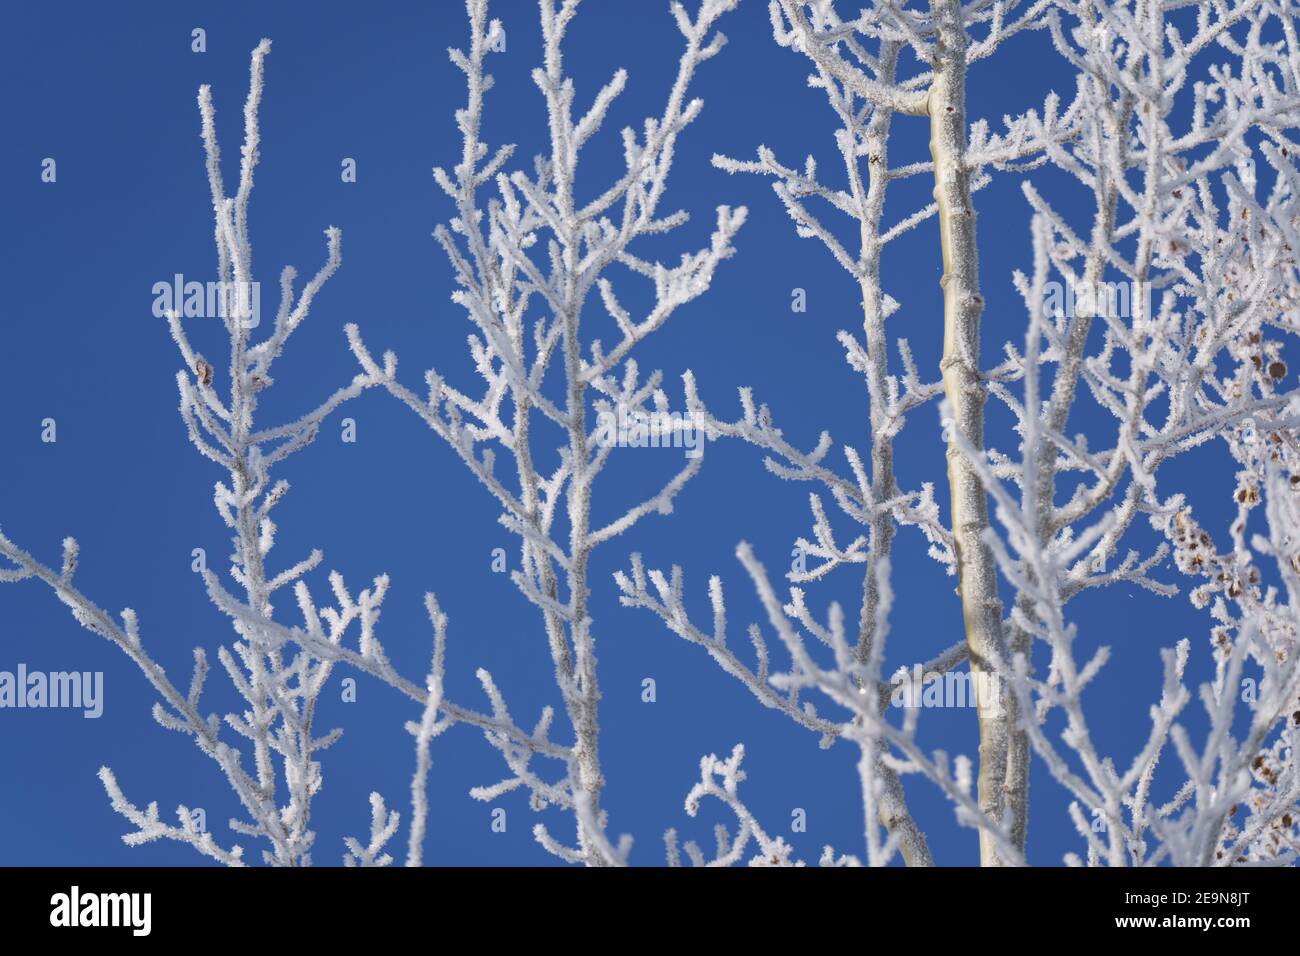 Frosty Aspen Tree Branches on Blue Sky in Winter Stock Photo